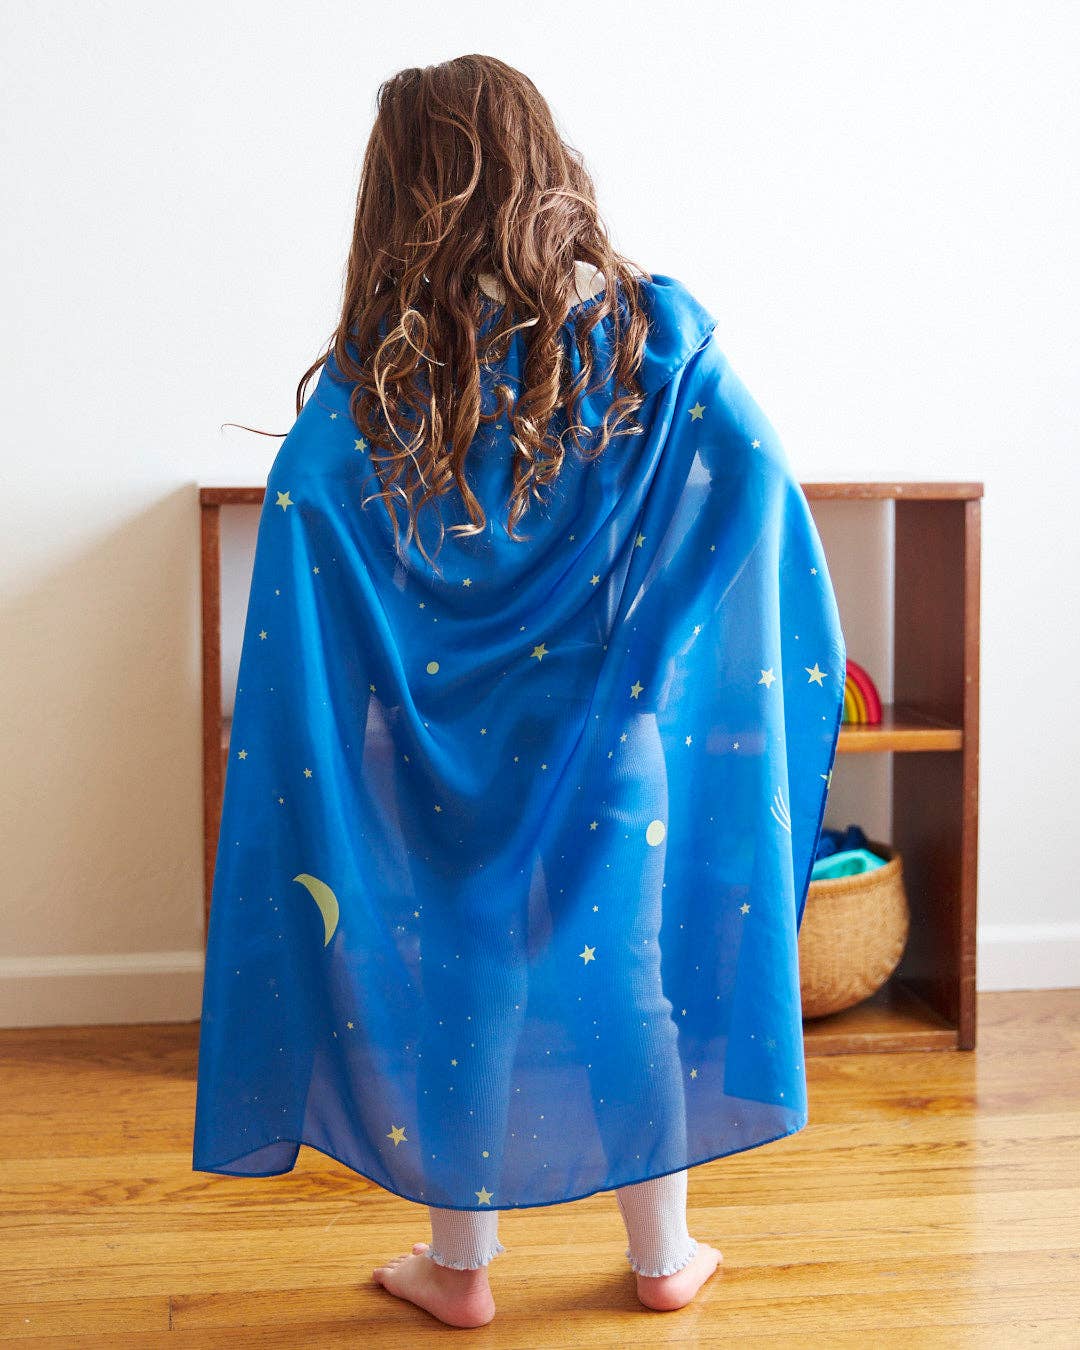 100% Silk Capes for Dress Up & Pretend Play: 1 / Star